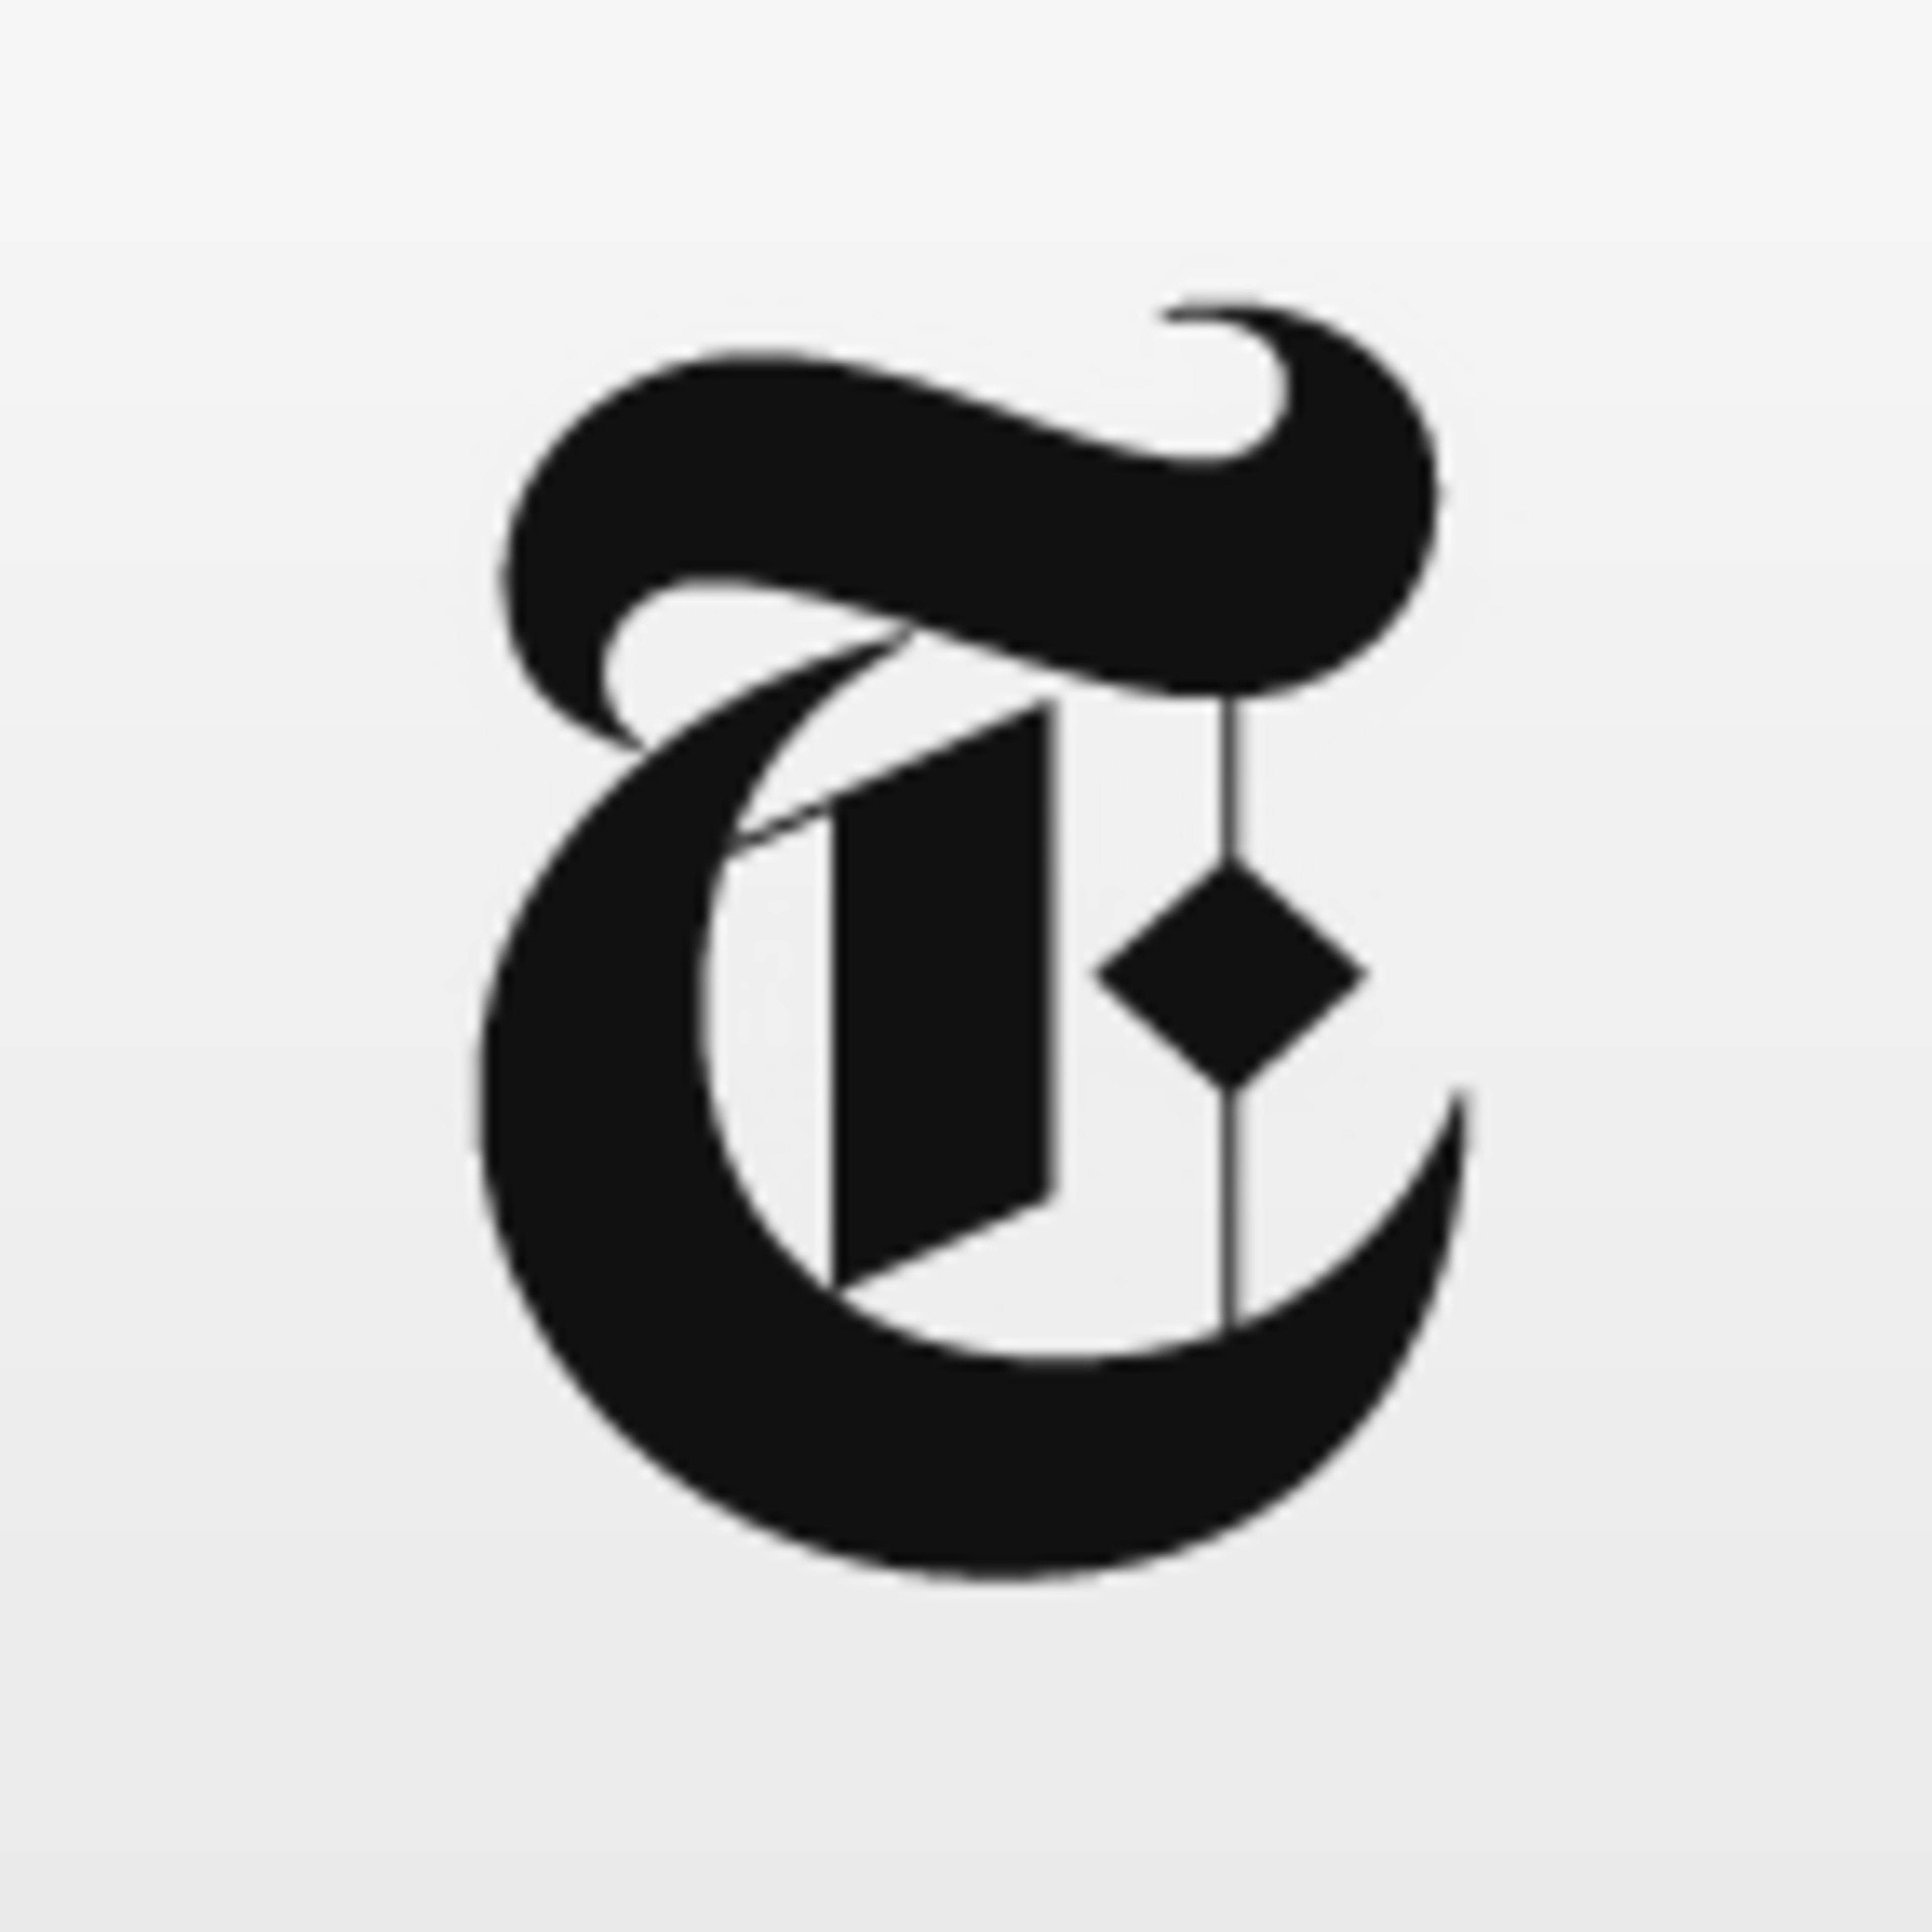 The New York Times Digital SubscriptionCode